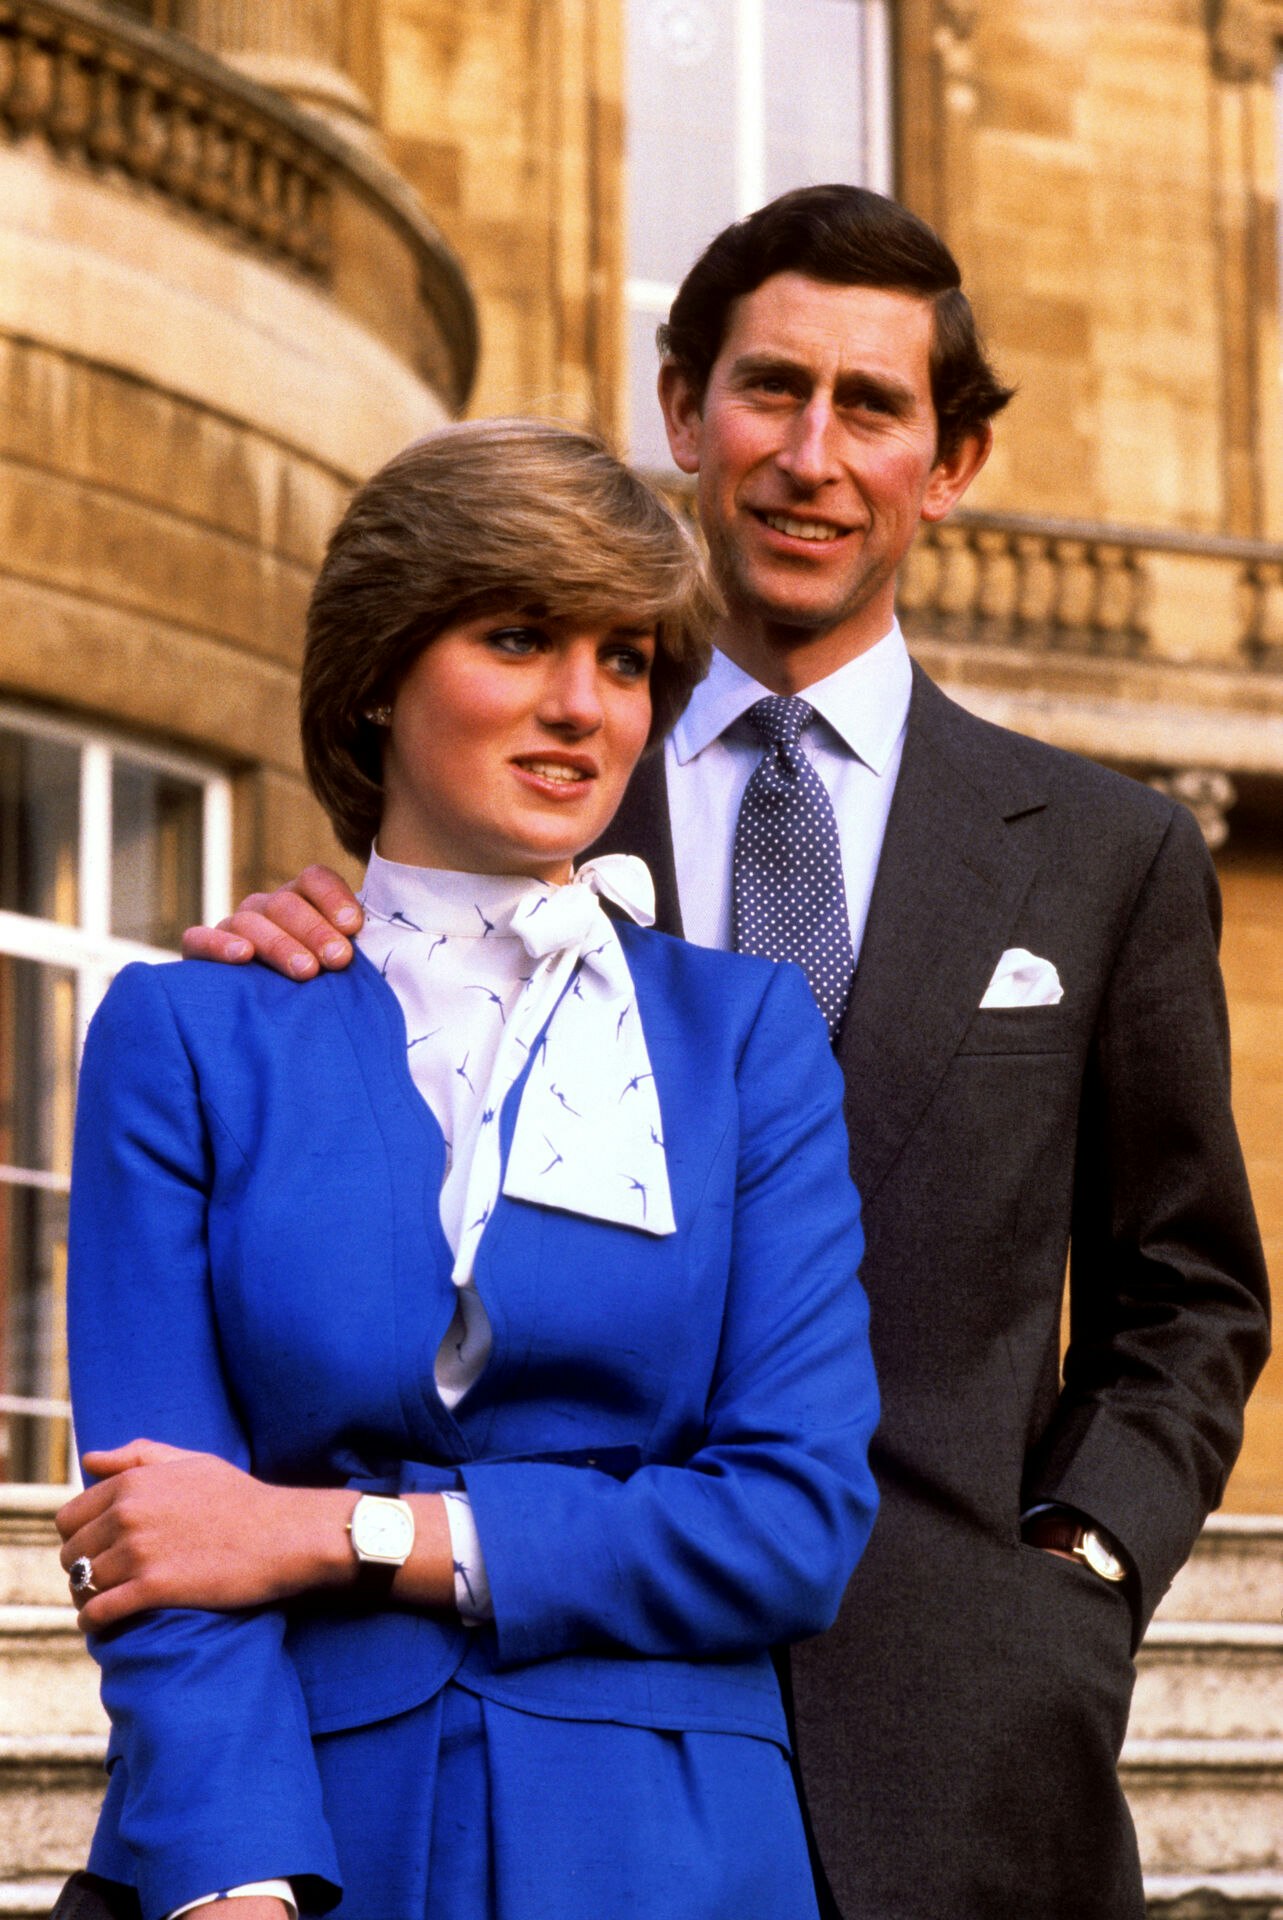 PA News photo dated February 1981. Pictured: Prince Charles and Lady Diana Spencer at Buckingham Palace after the announcement of their engagement. PA Feature SHOWBIZ Film Reviews. Picture credit should read: PA Archive/PA Images/Ron Bell. All Rights Reserved. WARNING: This picture must only be used to accompany PA Feature SHOWBIZ Film Reviews.